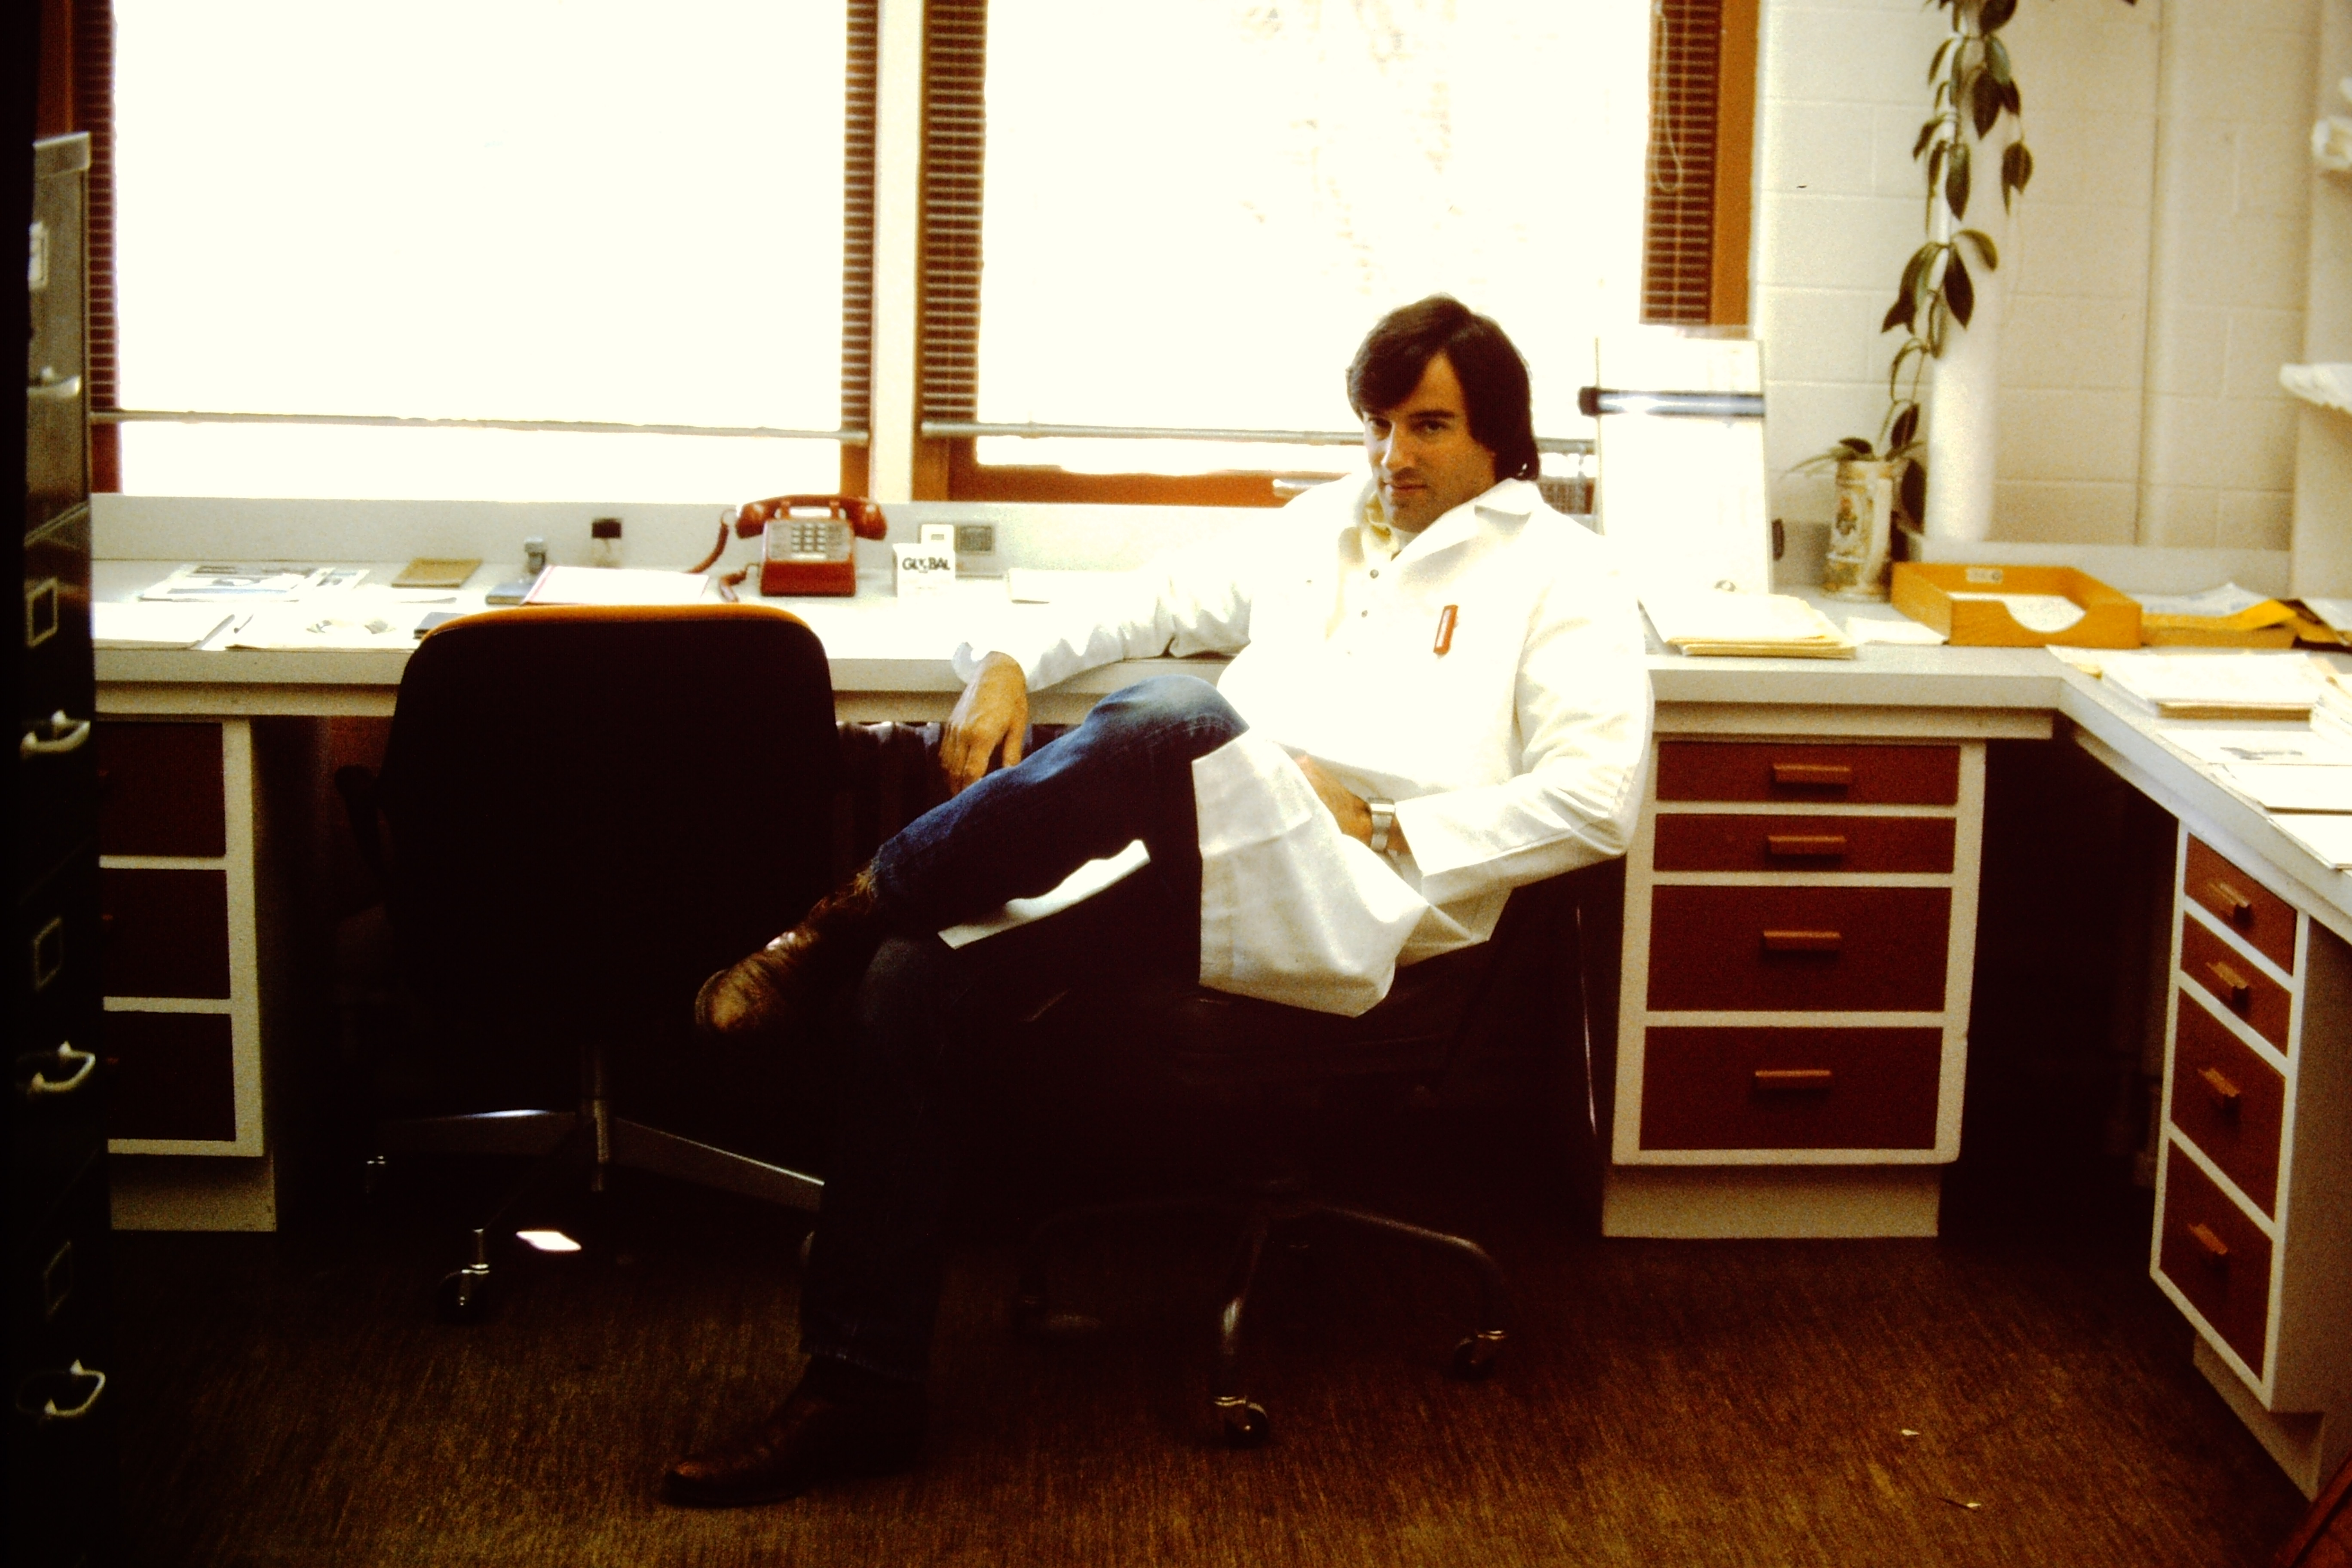 Man in white coat sits at desk in lab bench.